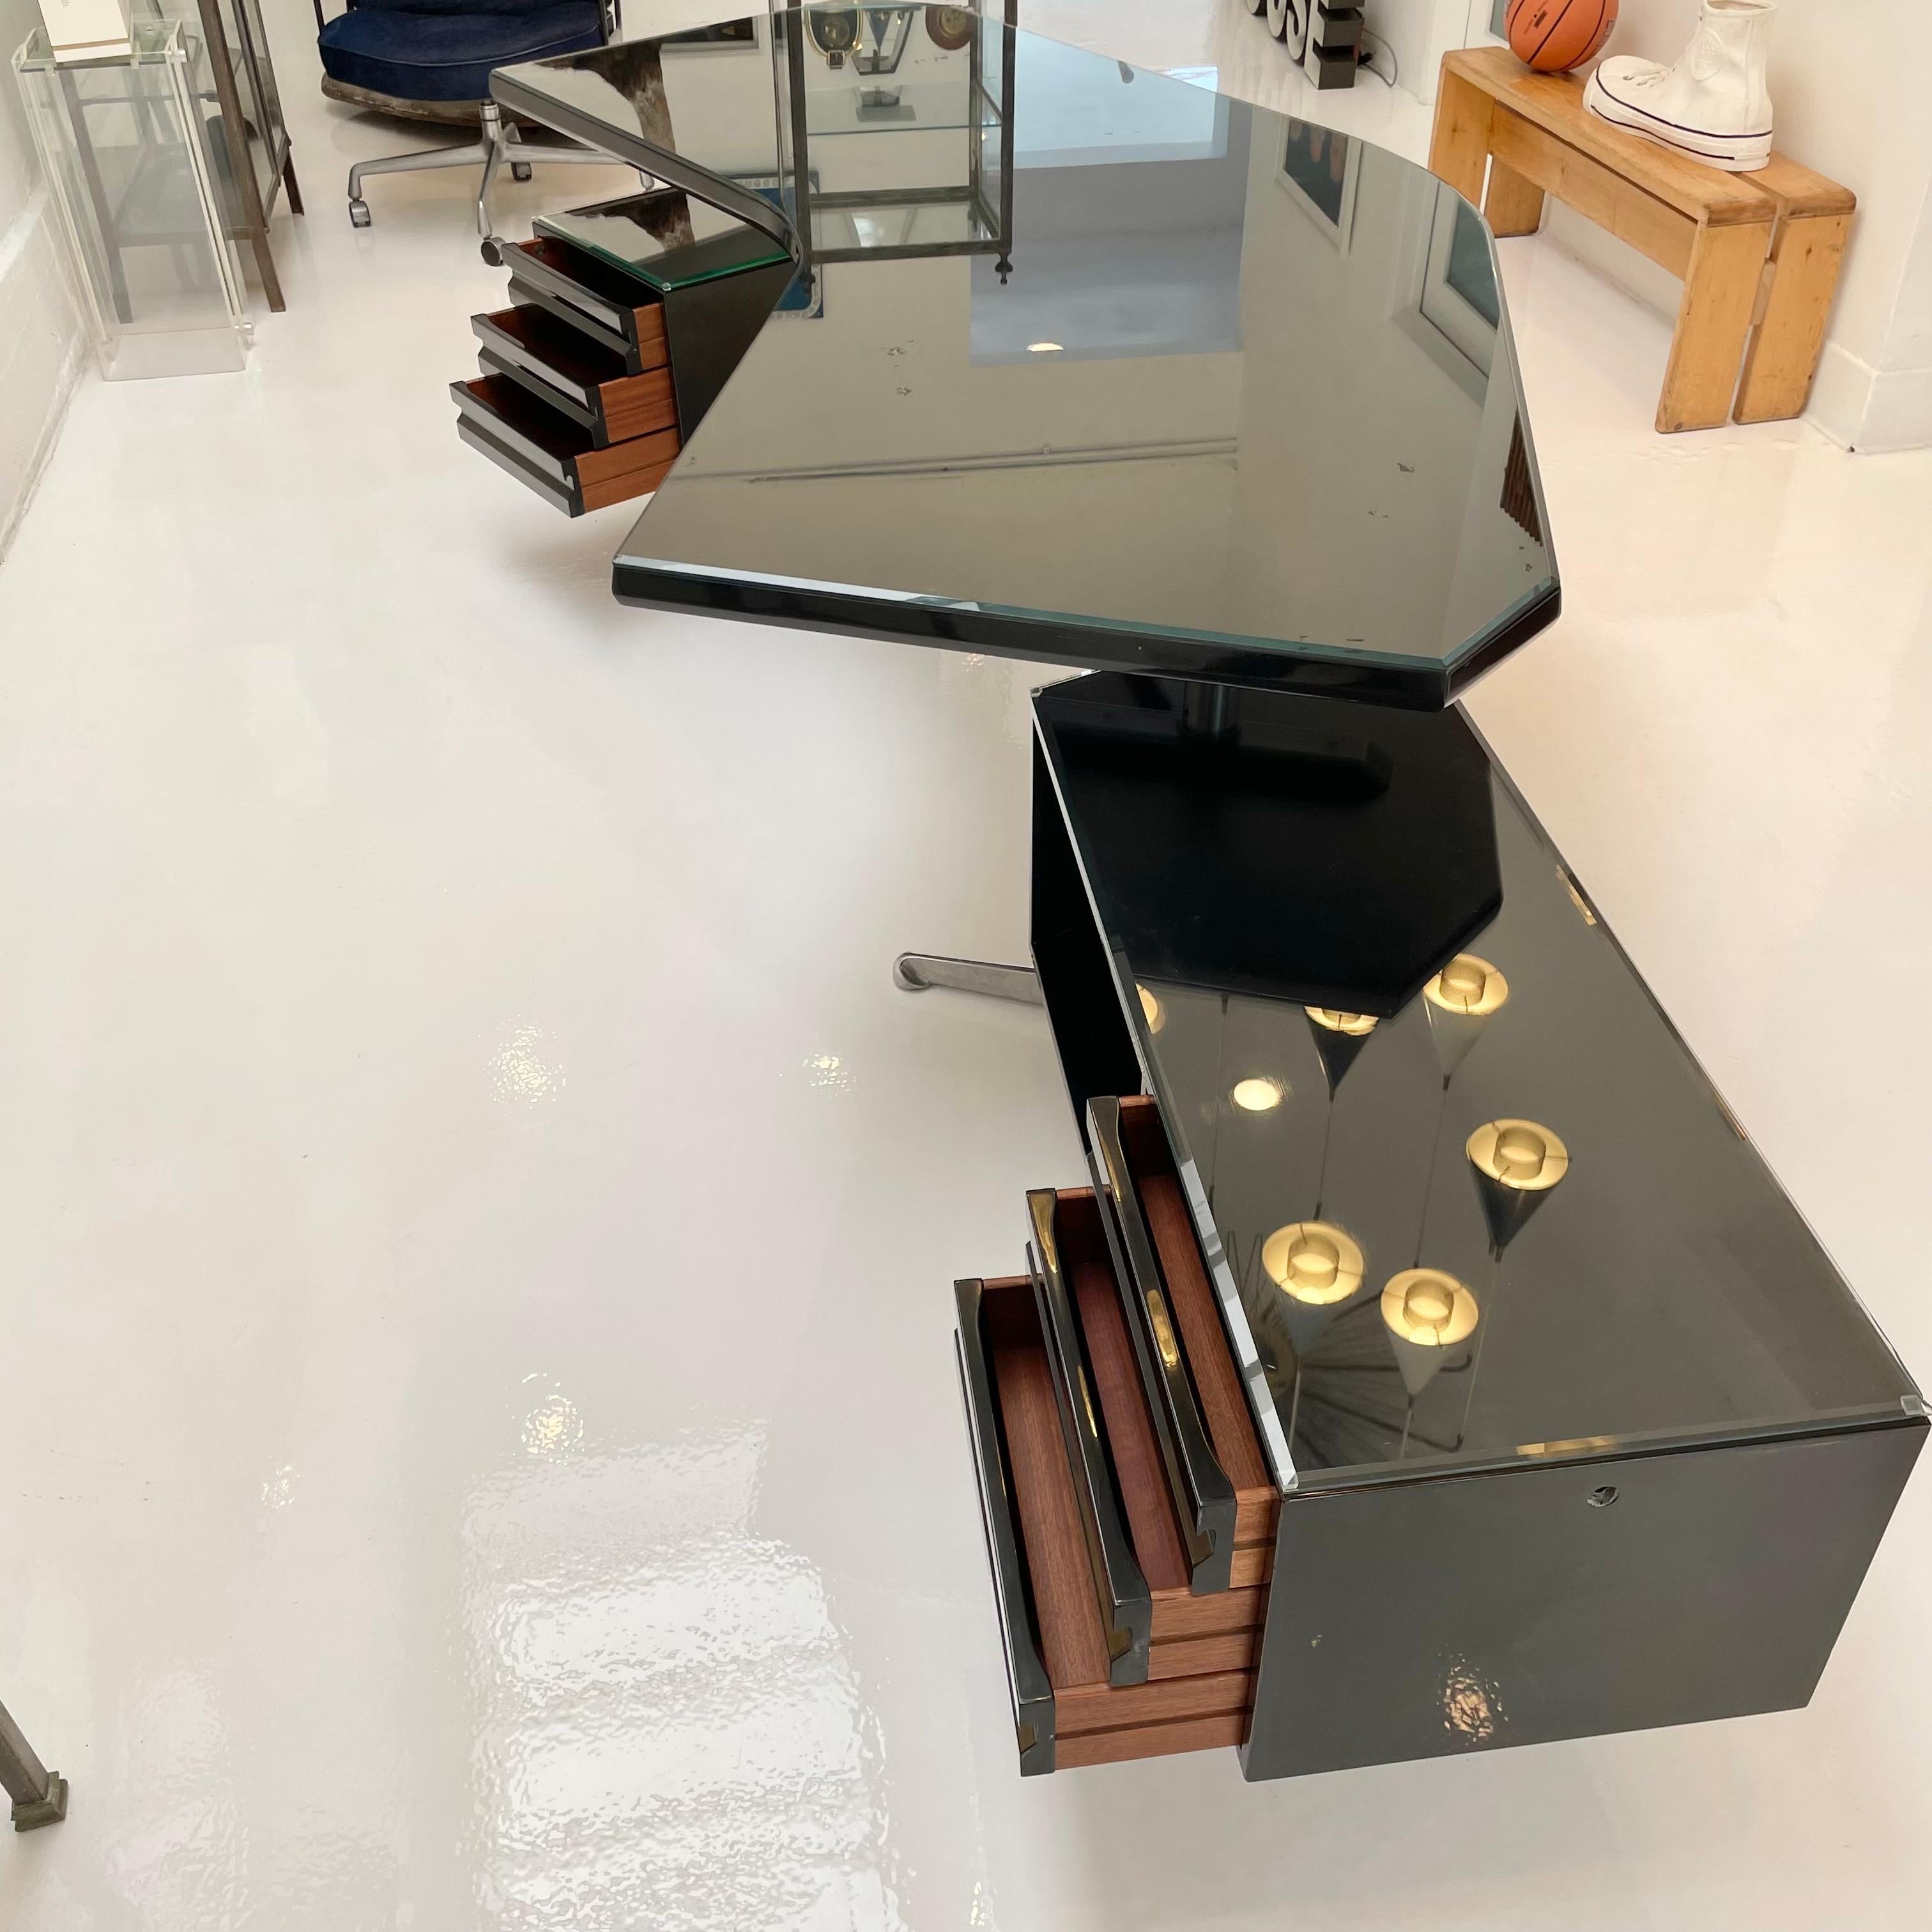 Architectural black boomerang executive desk by Osvaldo Borsani for Tecno Milano. Brought back to life in original black finish. Floating pedestal on left side and longer return on the right, both rotate 360 degrees. Three pull out drawers and